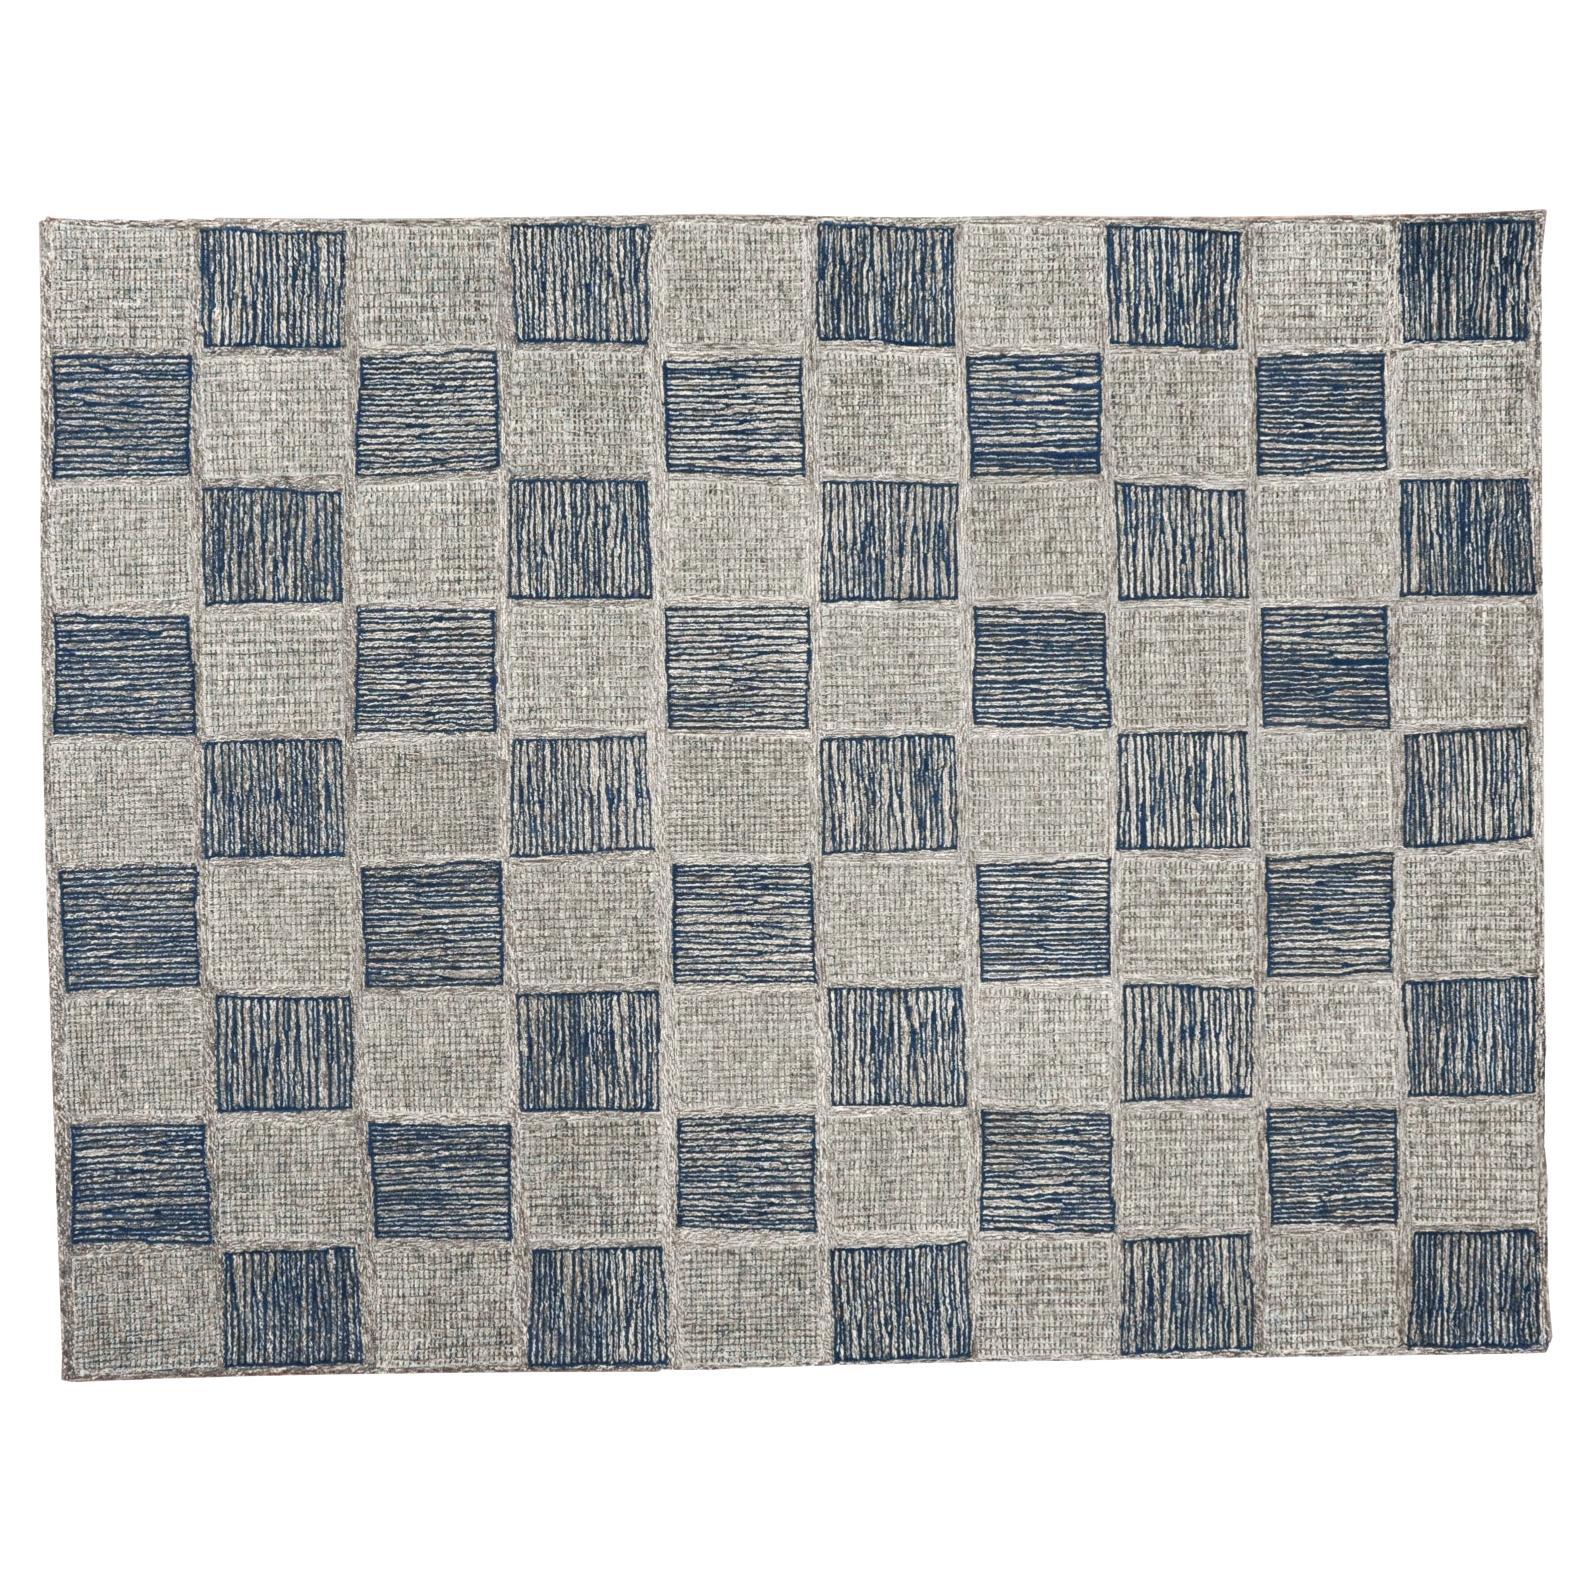 9'x12' Checkered Box Design with Blues and Greys Rug 